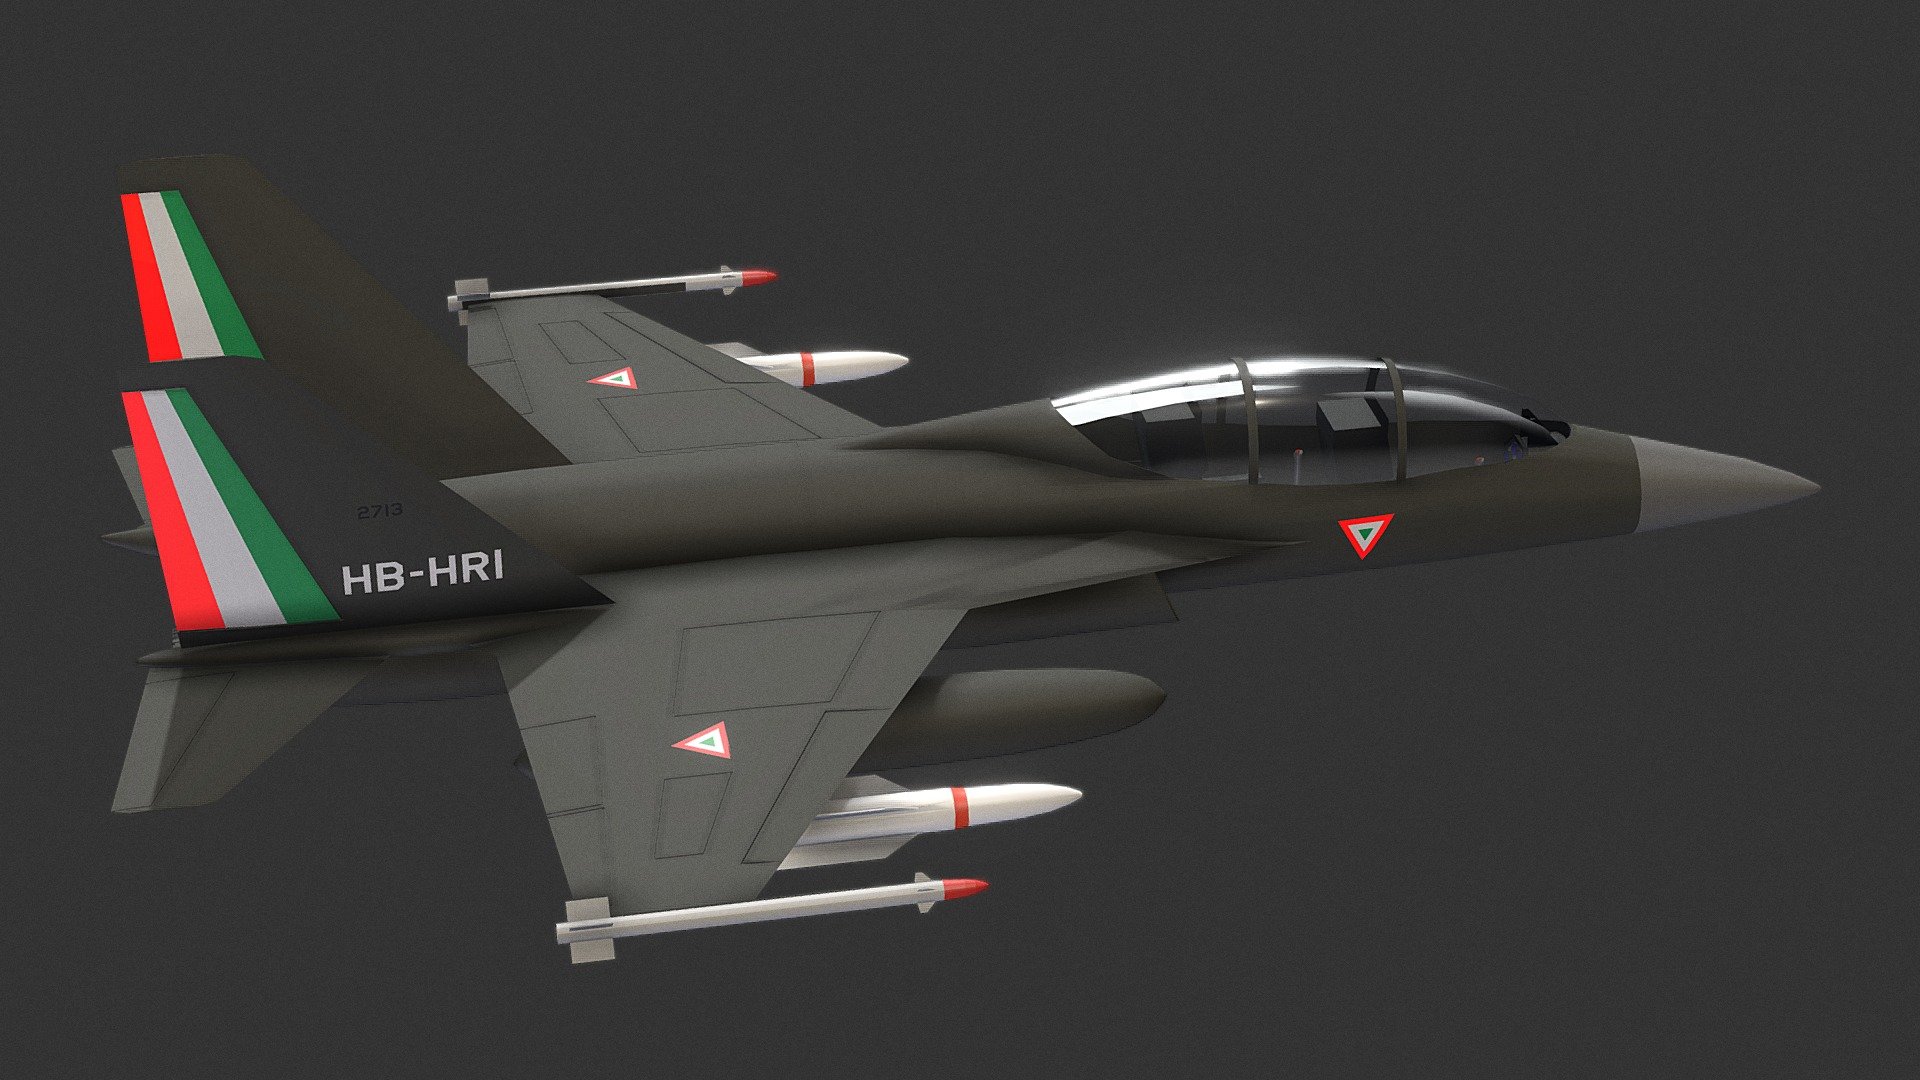 Twin engine advanced supersonic jet trainer and light combat aircraft. Shown in the colors of the Mexican Air Force trainer squadrons, currently equipped with Pilatus PC-7s.

Inspired by the likes of the KAI T-50 Golden Eagle, Alenia Aermacchi M-346 Master, and Yakovlev Yak-130 - Advanced trainer - 3D model by nestor_d 3d model